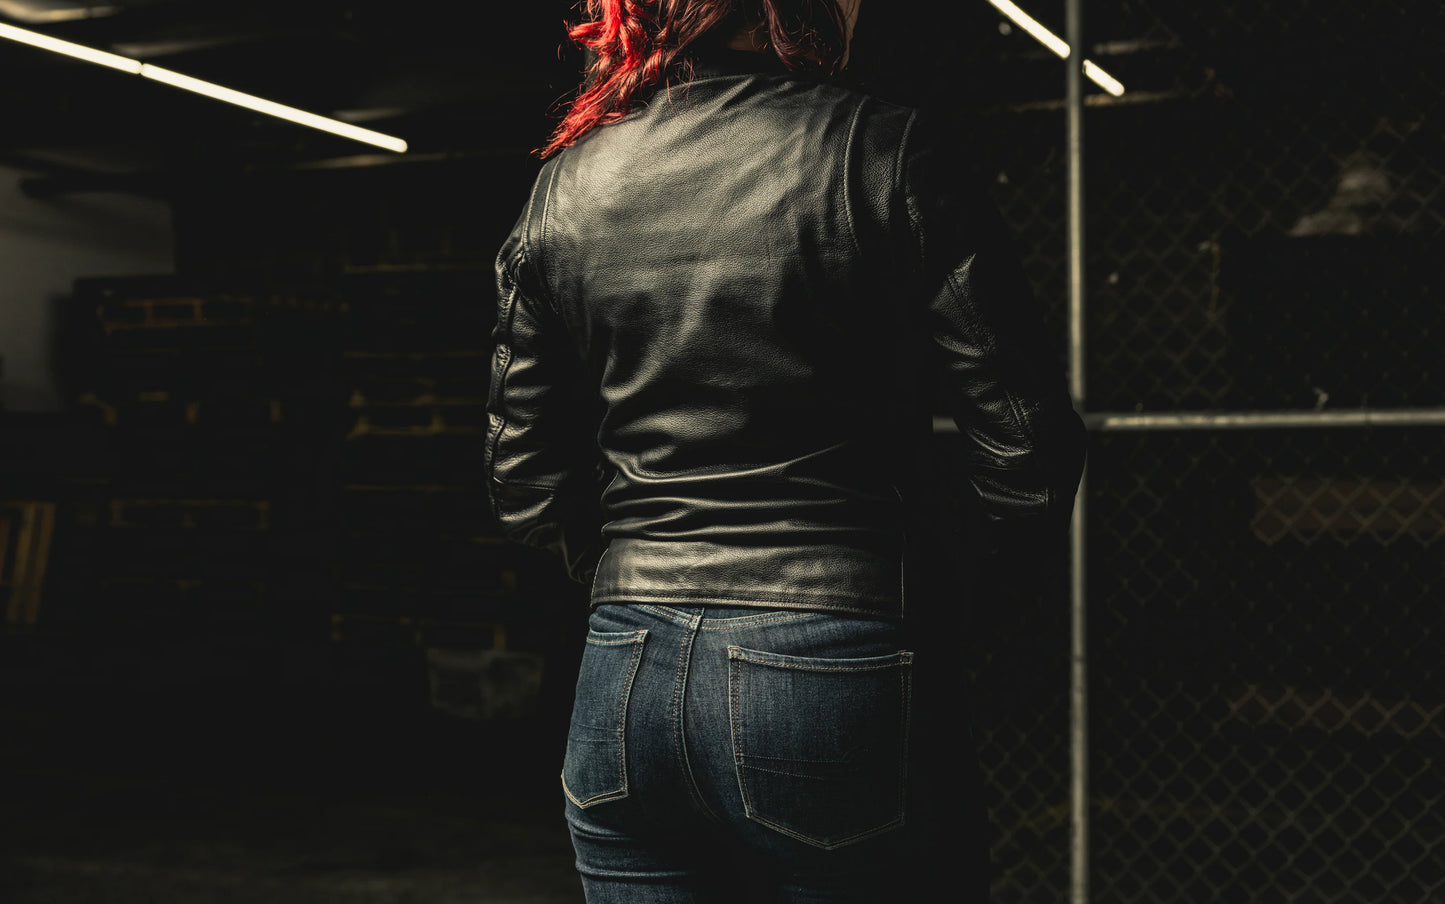  Back view of a woman wearing Flashback Leather Motorcycle Jacket, highlighting the design and silhouette from behind.